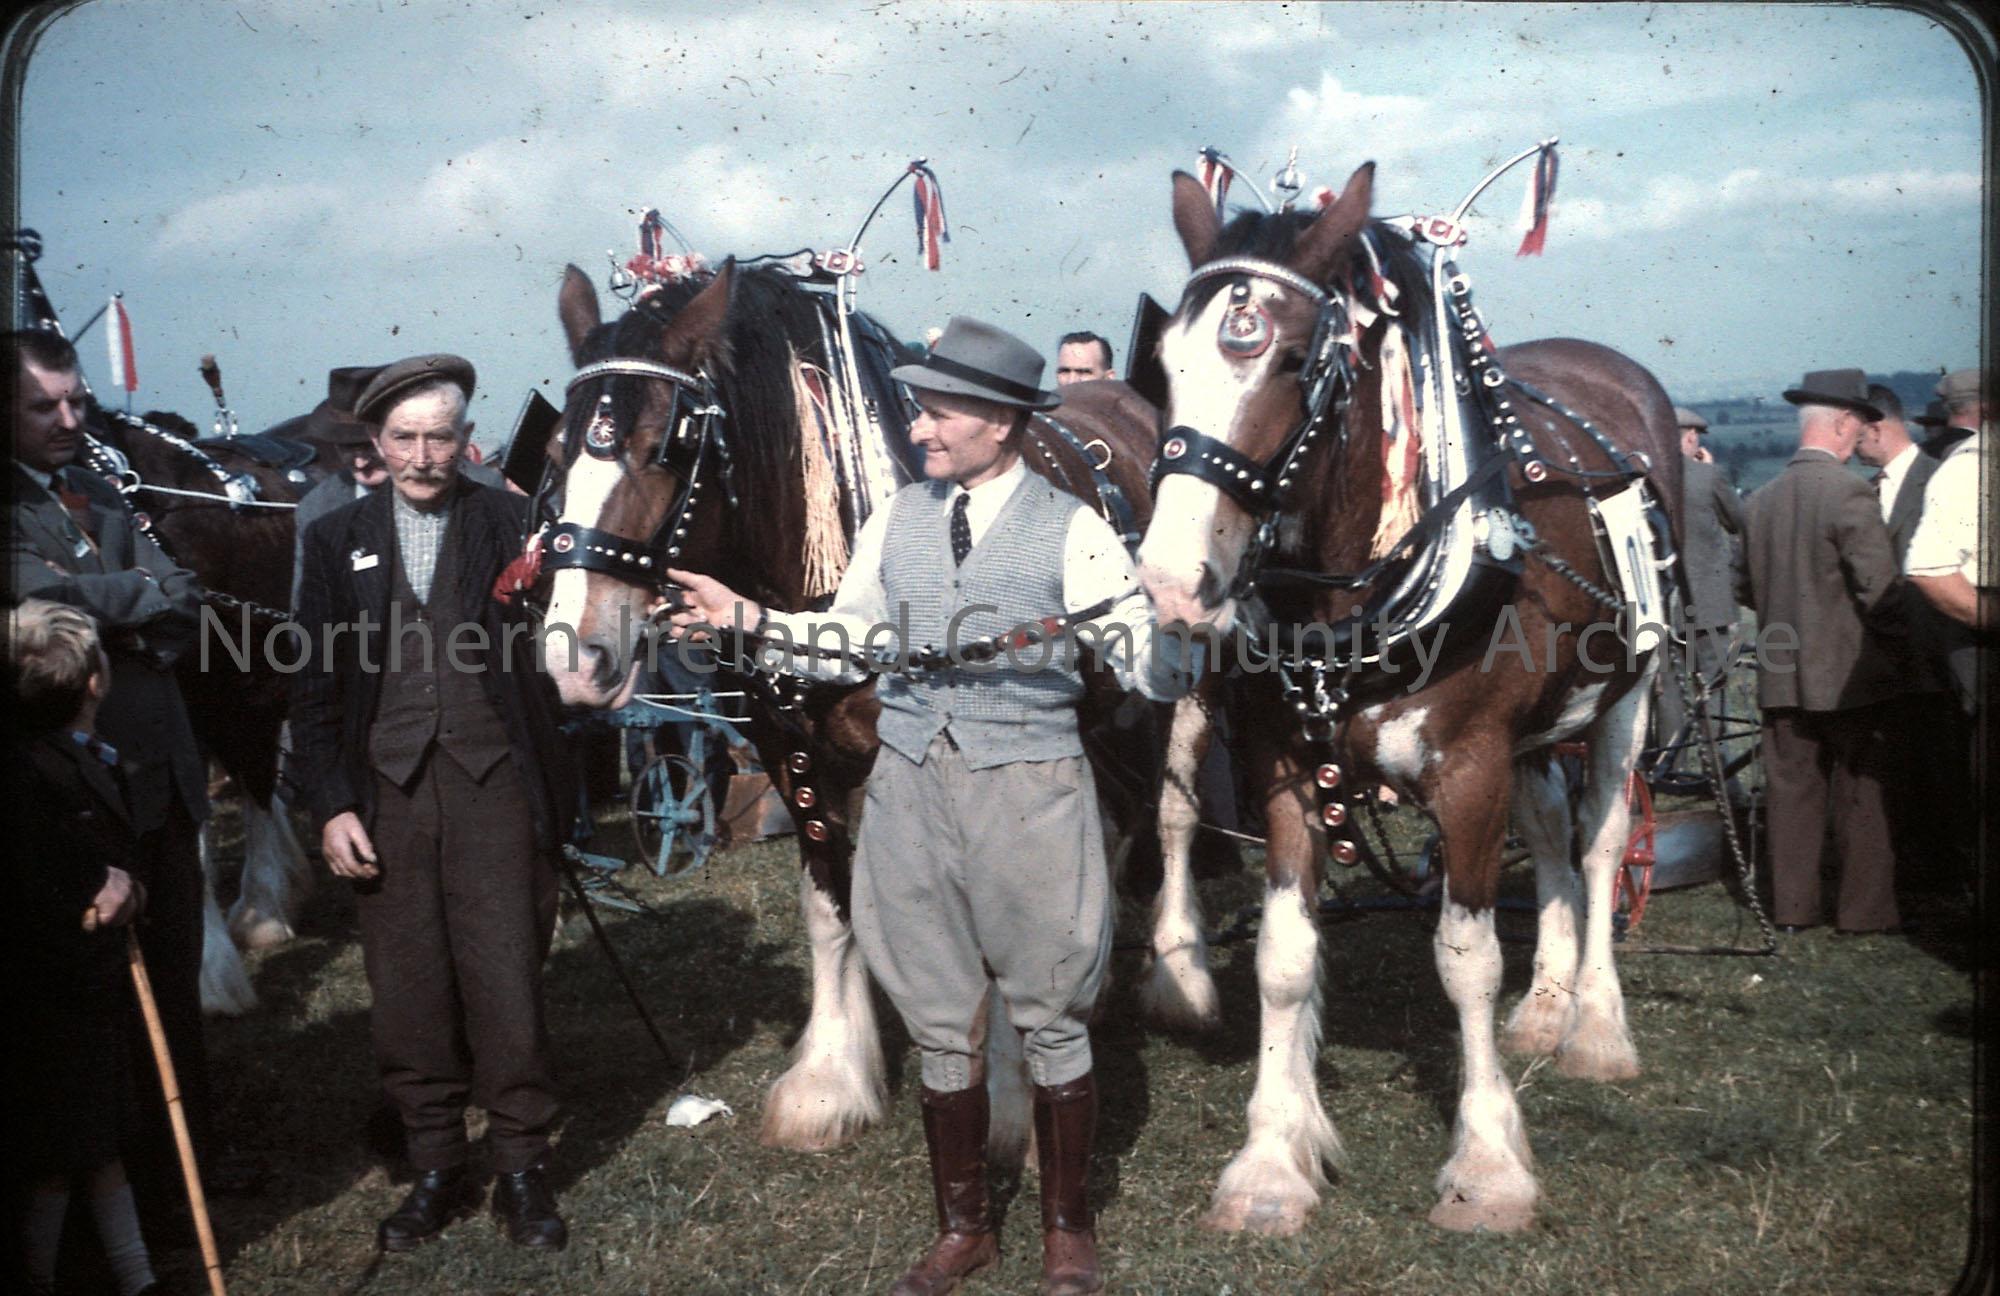 International ploughing match, 1959- two horses